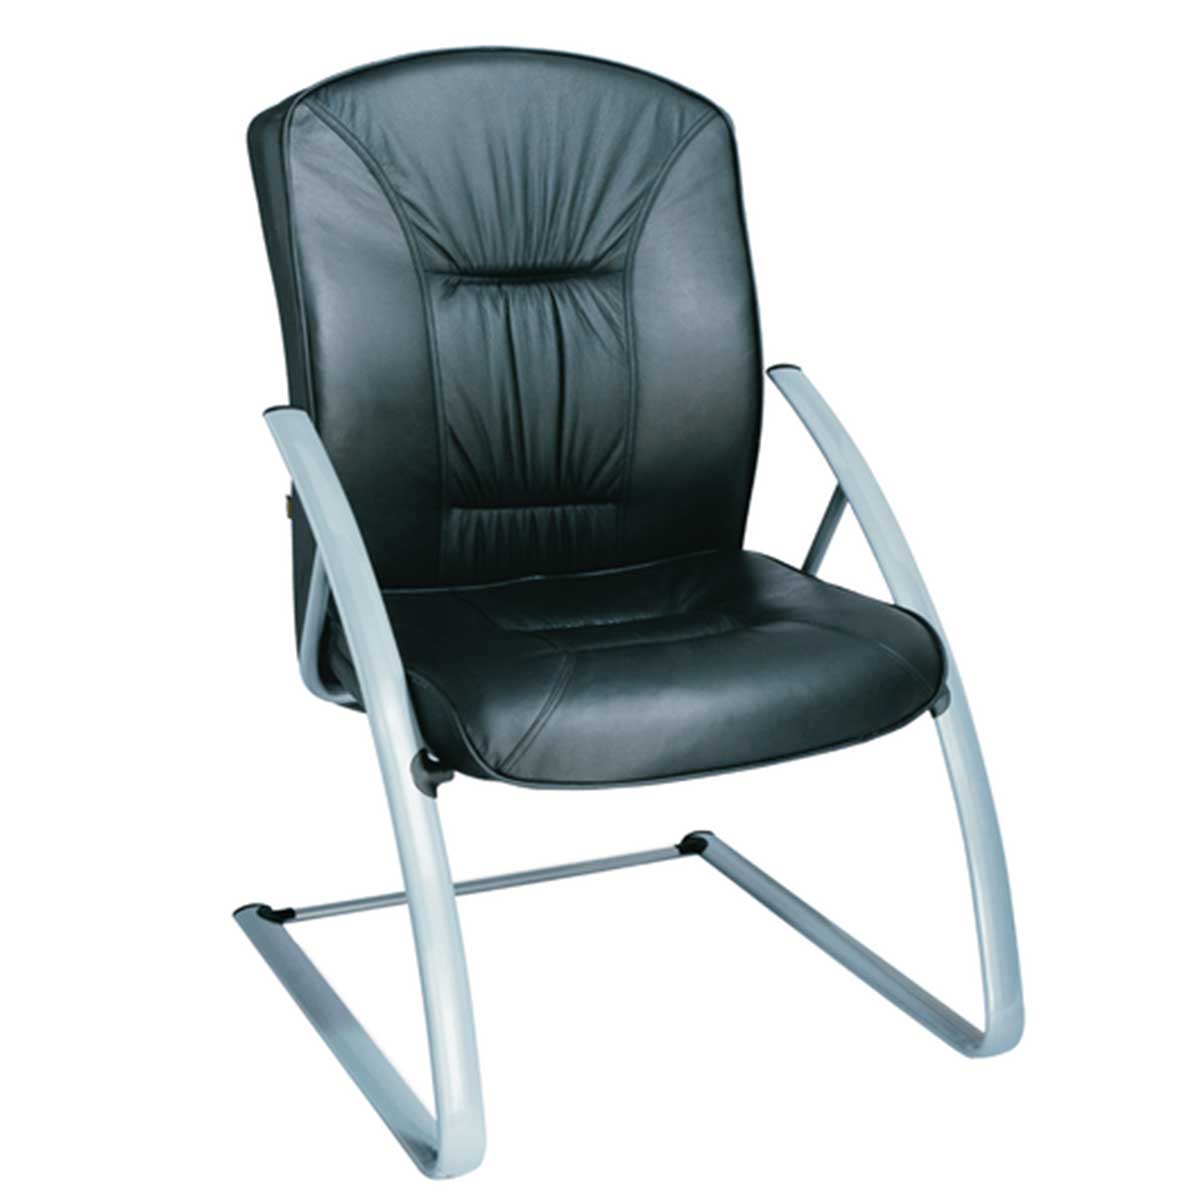 Leather office chair Manufacturers, Suppliers in Aerocity